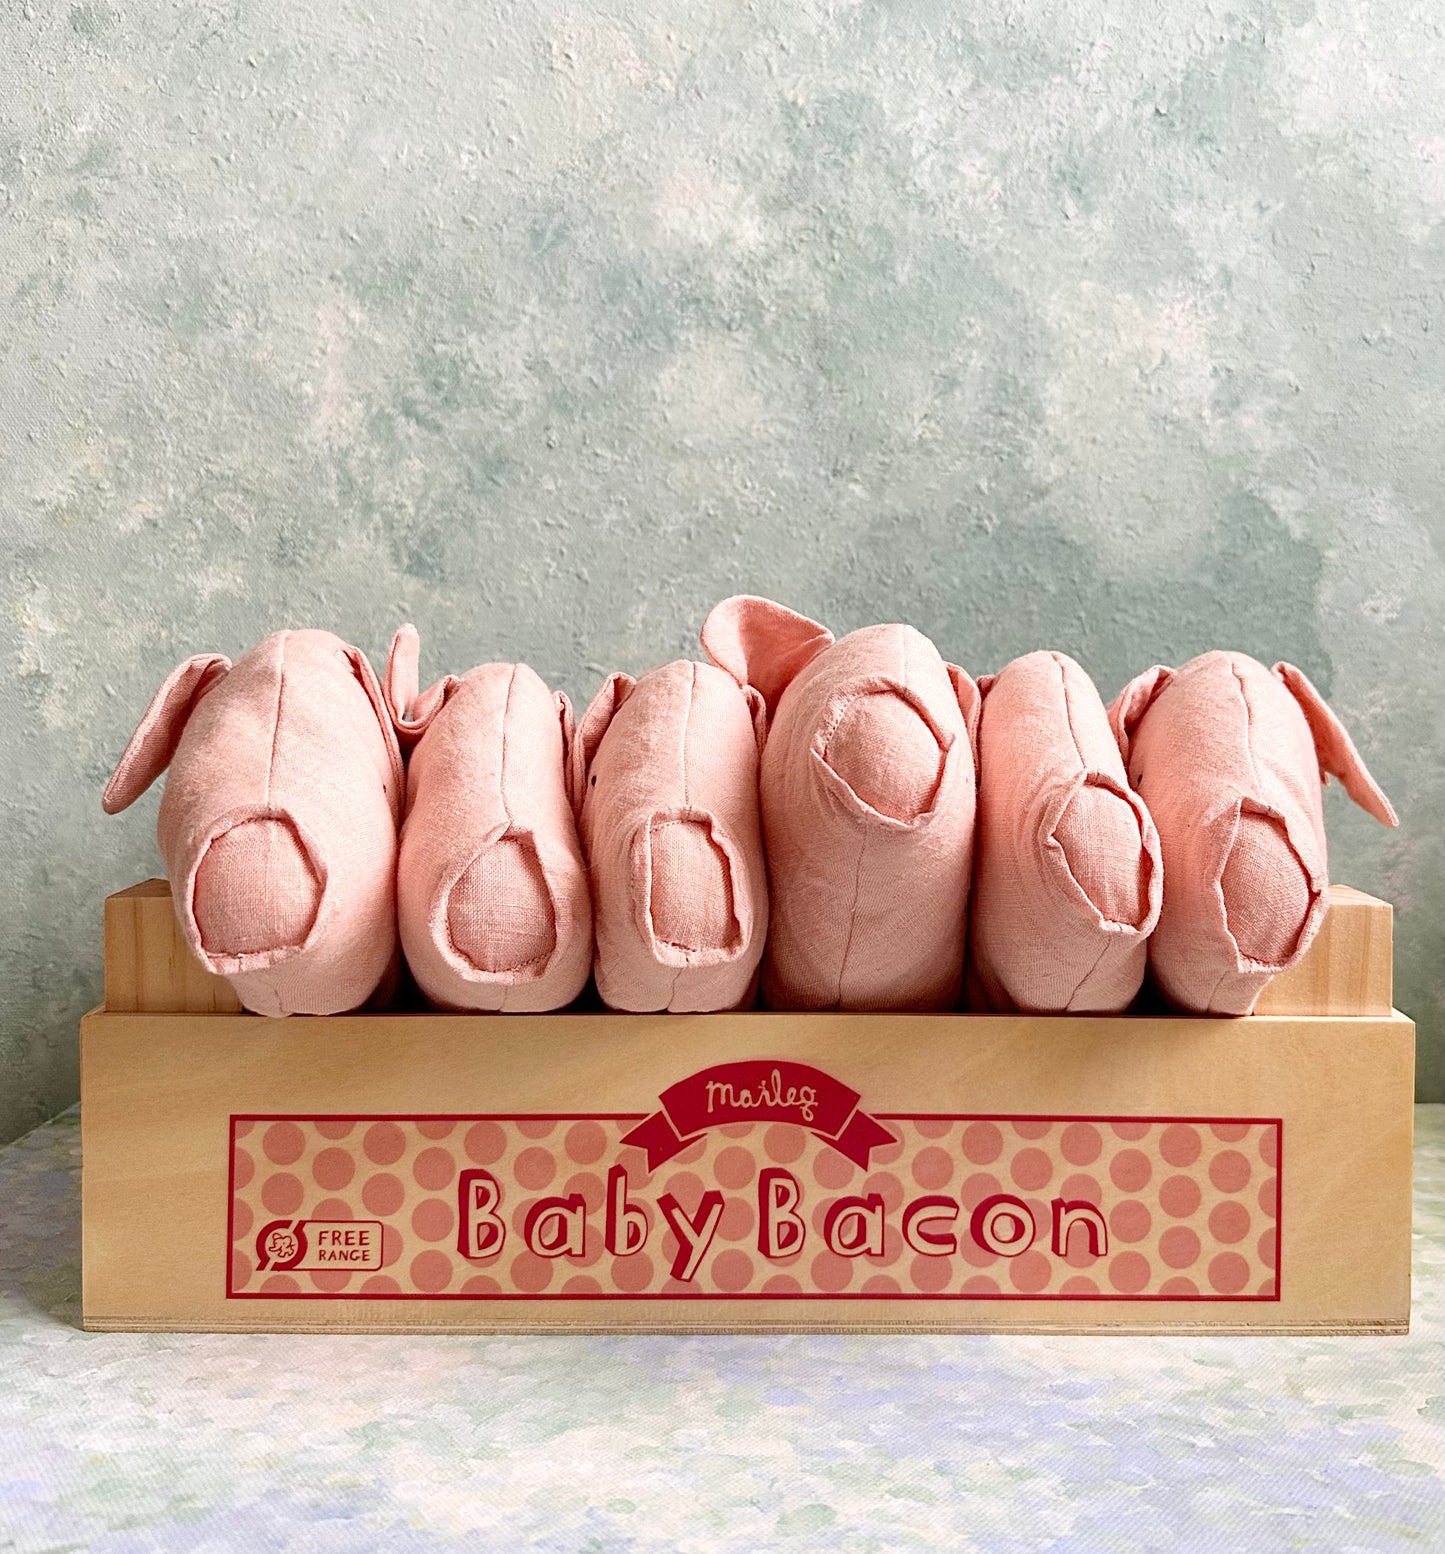 Baby Bacon in Box - 2016